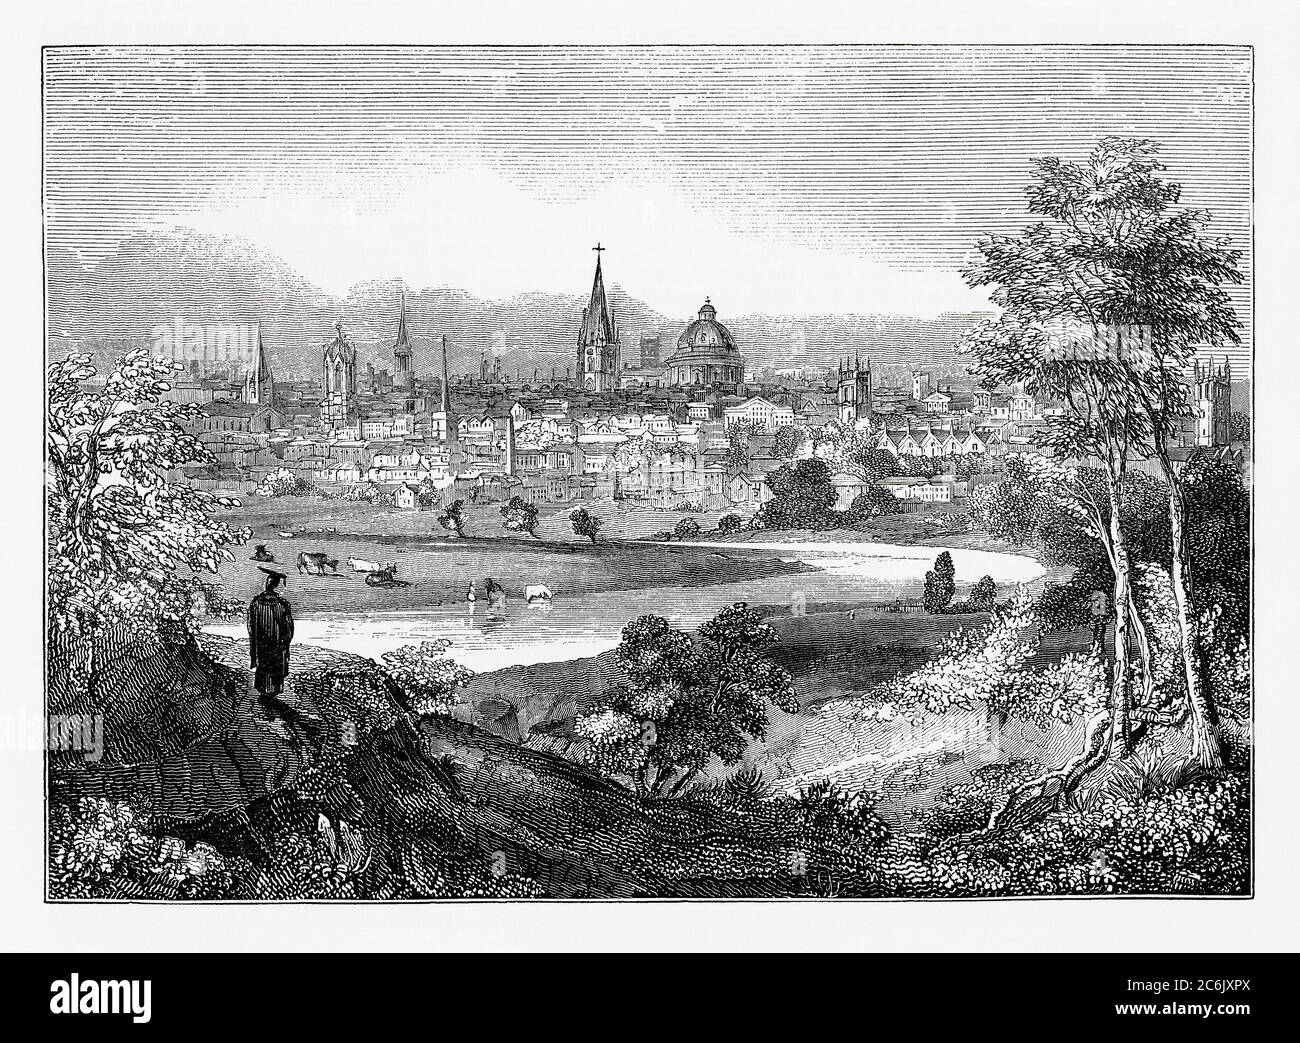 An old engraving of Oxford, Oxfordshire, England, UK c. 1800. The city's famous university and many churches gave rise to it being described as the 'city of dreaming spires'. The dome is the Radcliffe Camera built in 1748. In the foreground, south of the city, is the River Thames with cattle grazing on the water meadows. Stock Photo